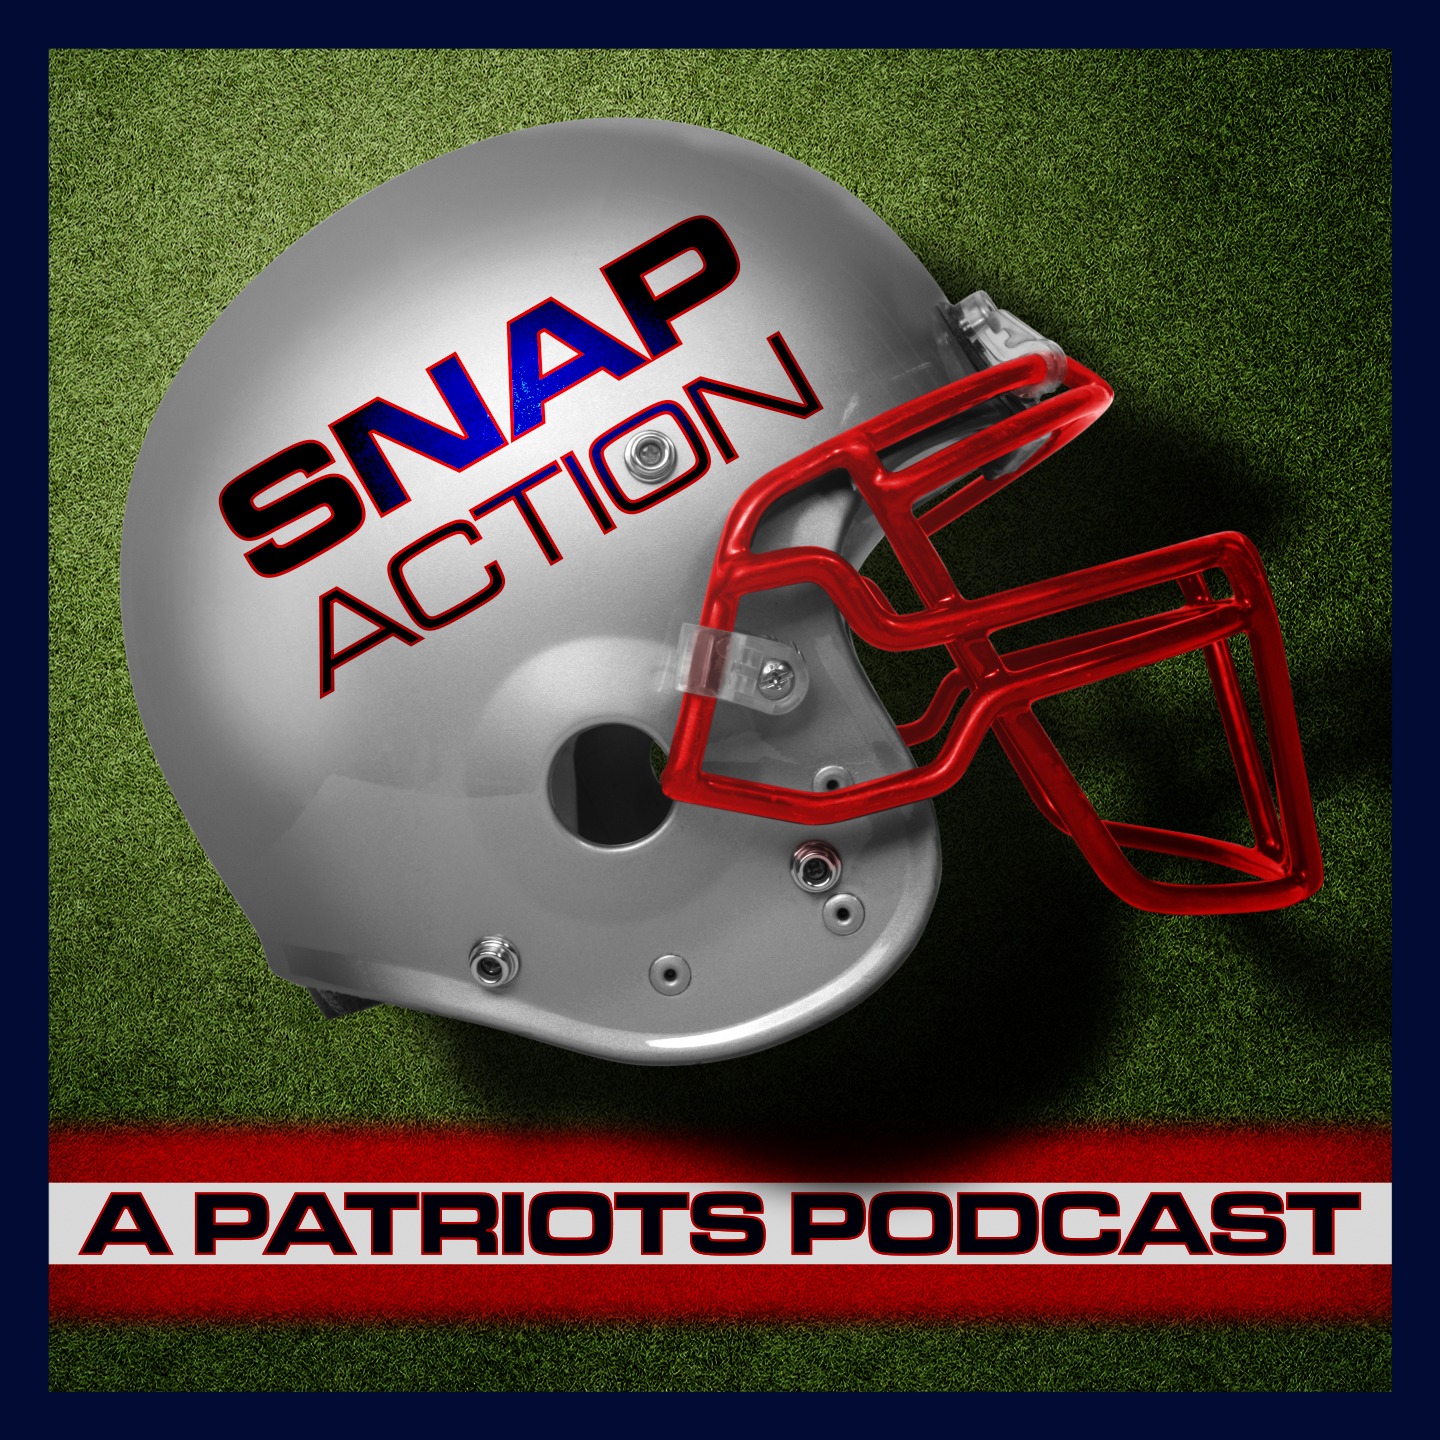 Snap Action: A Patriots Podcast